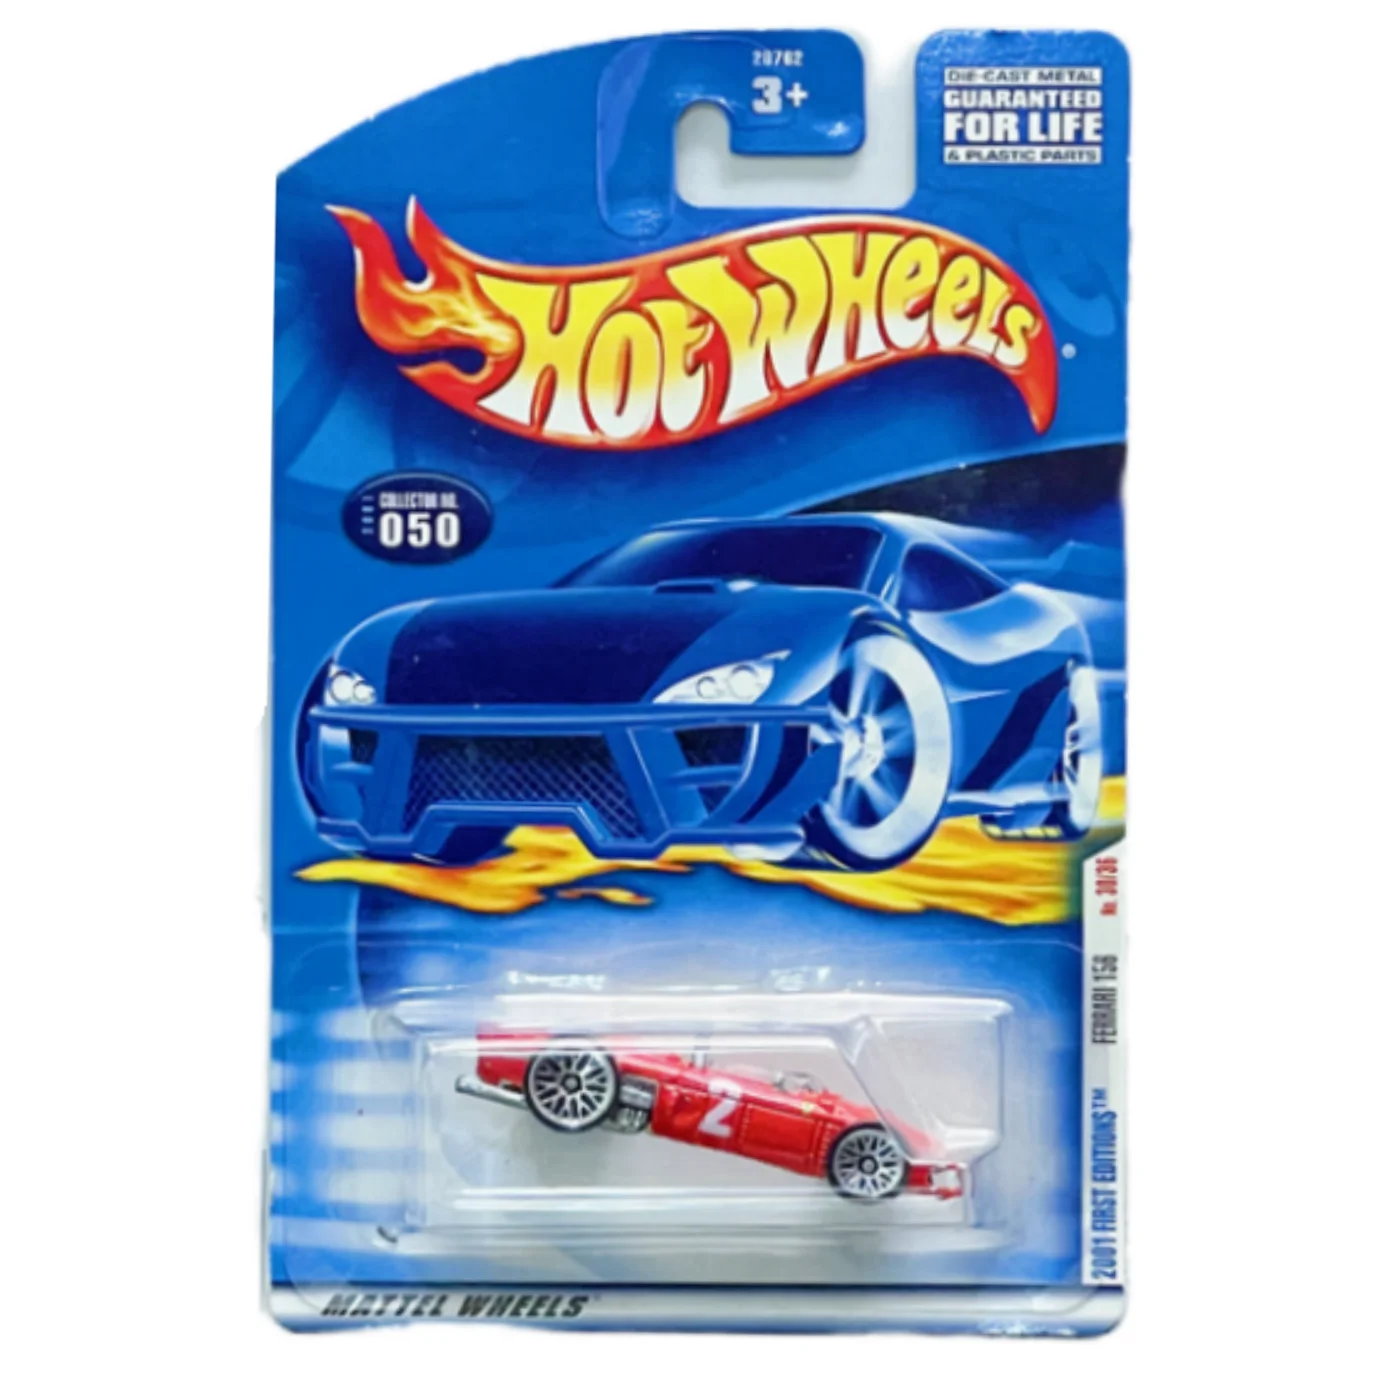 Hot Wheels 2007 - Collector # 003/156 - First Editions 3/36